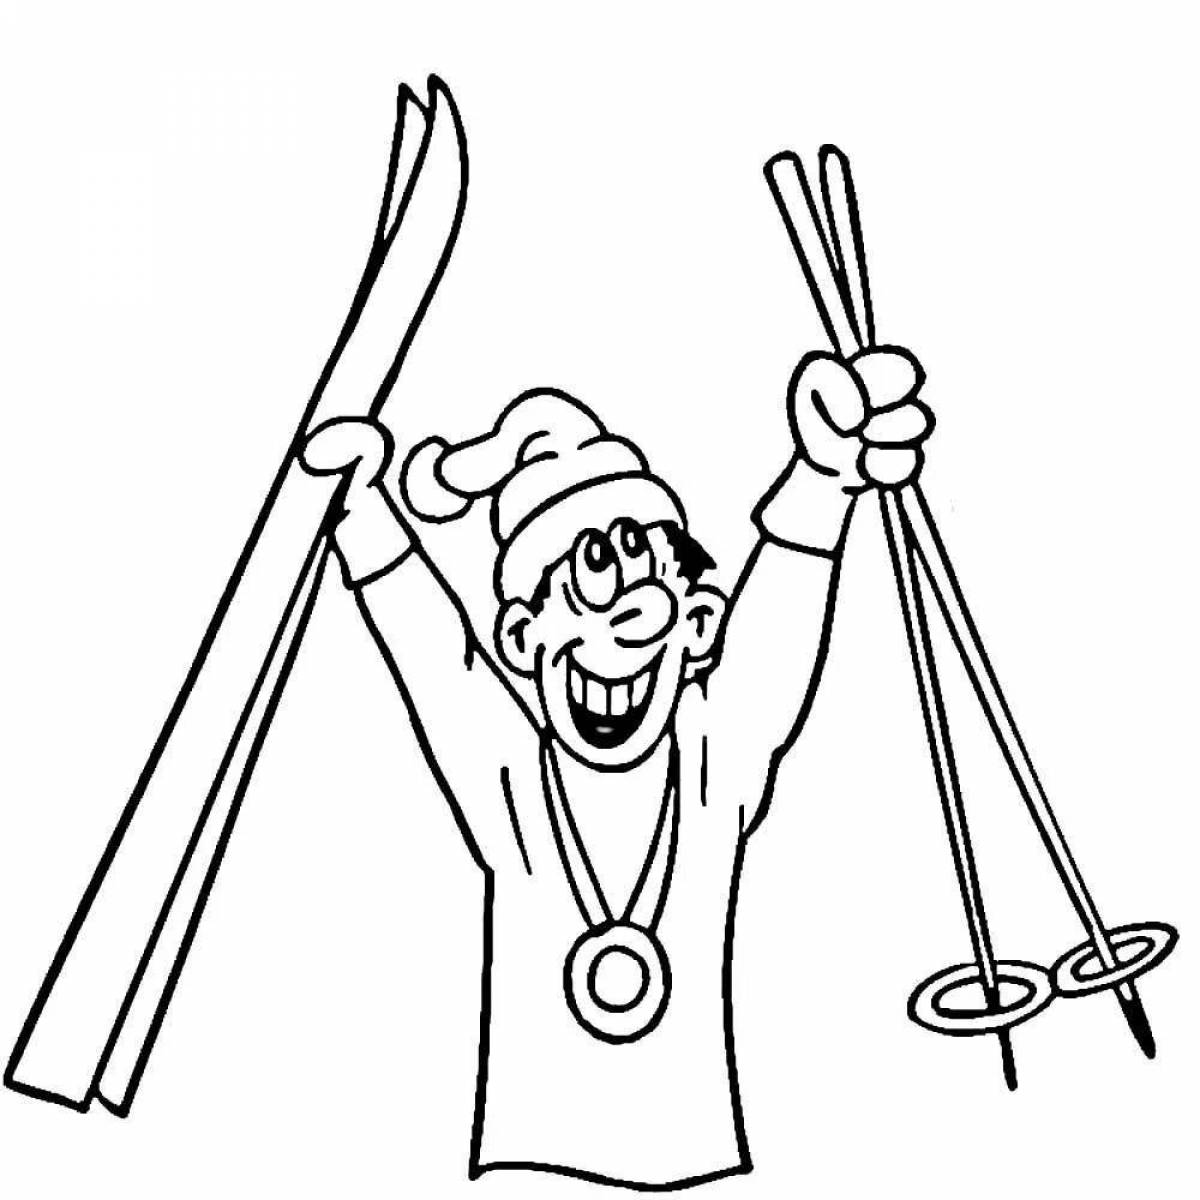 Coloring page magical ski race